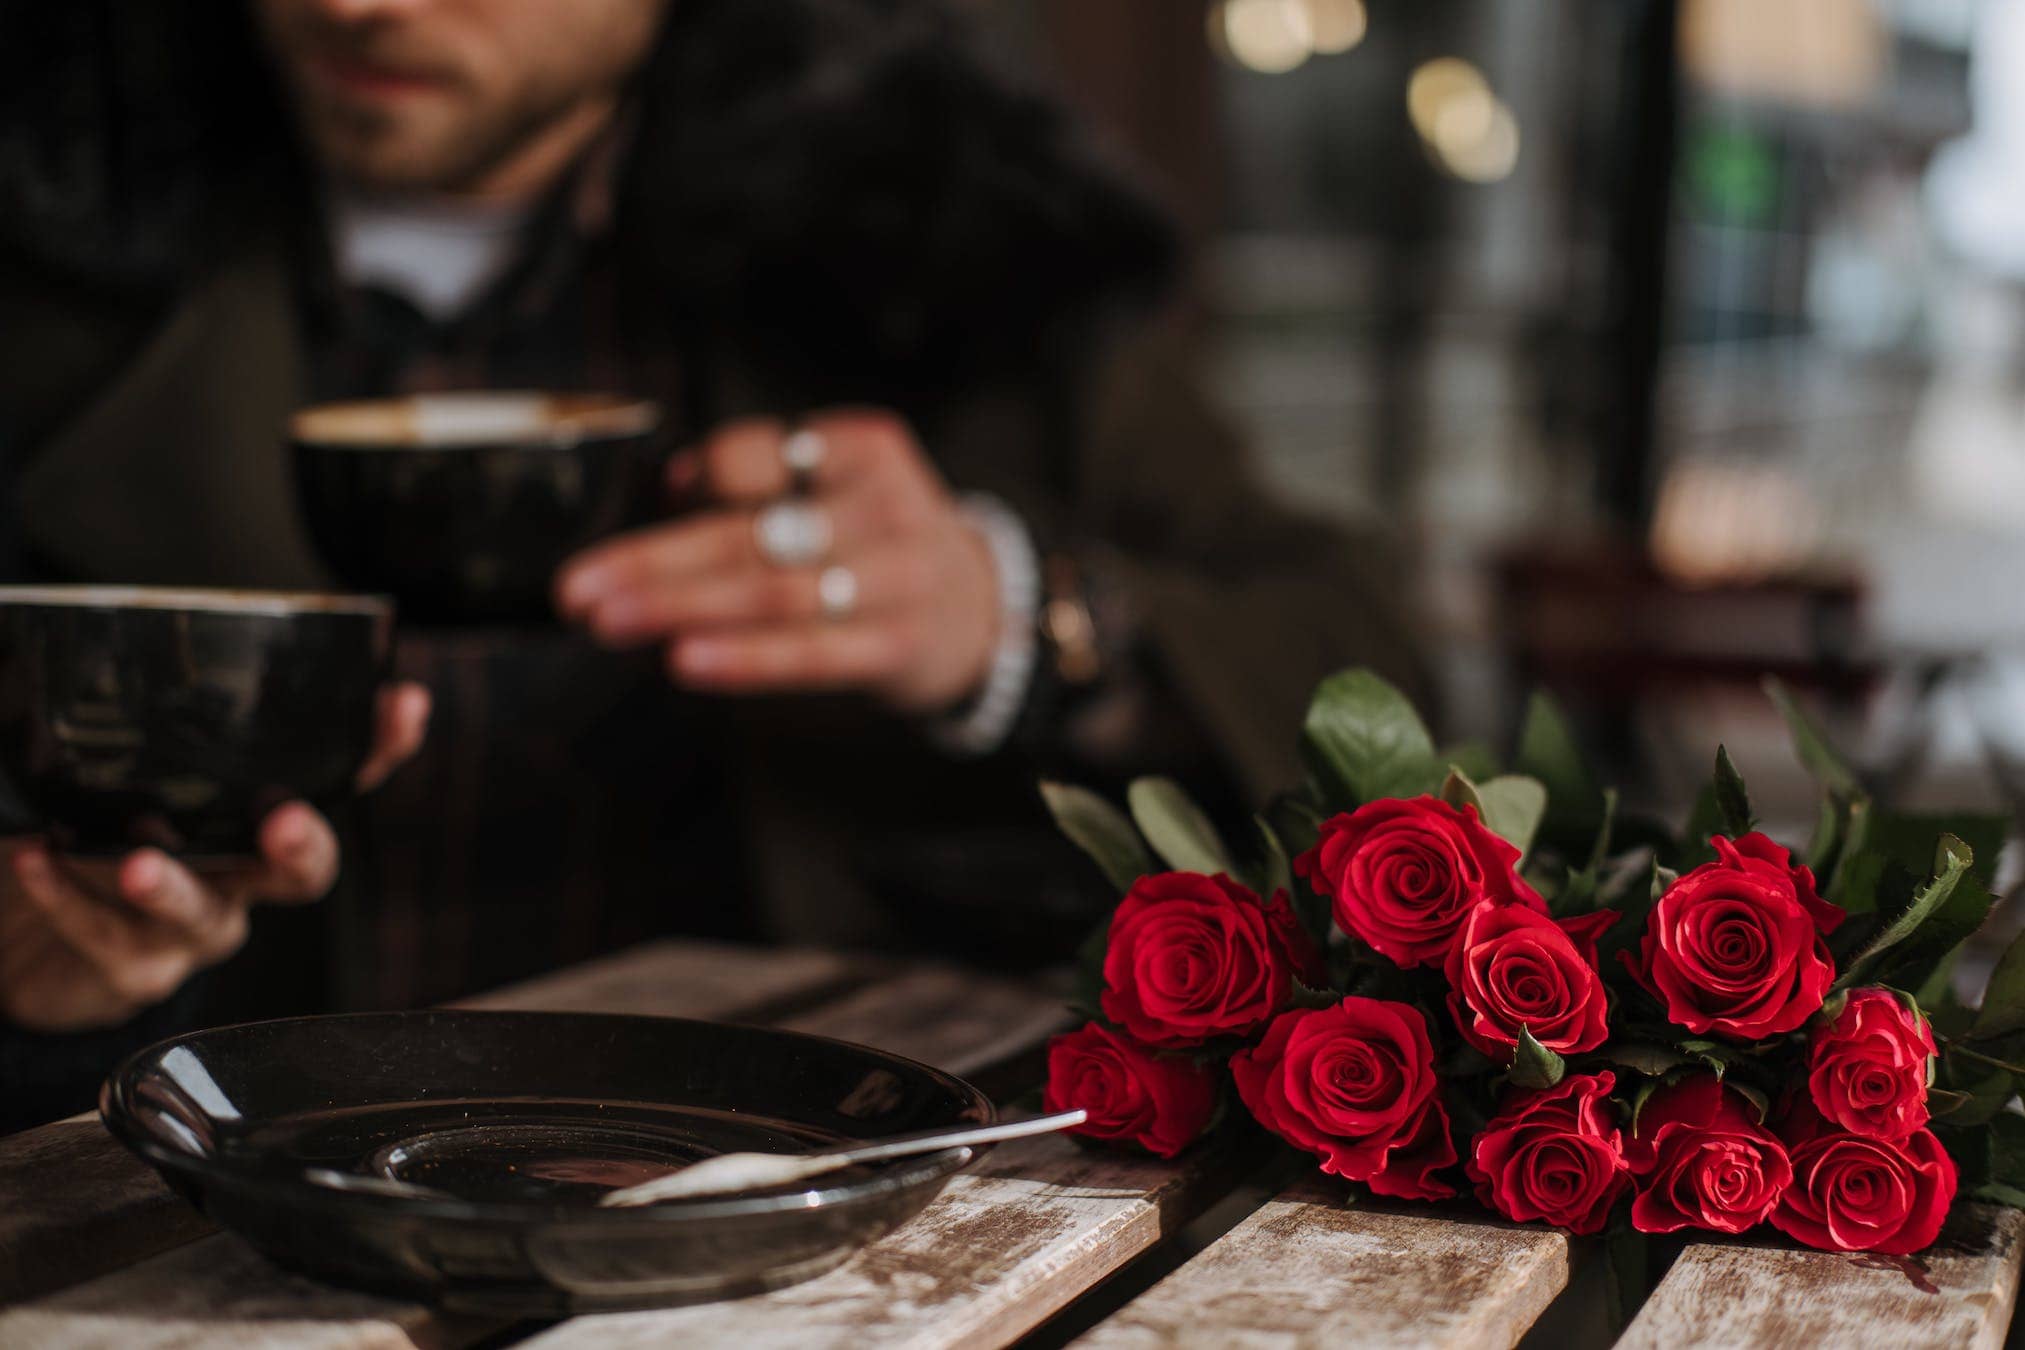 Brewing Love: A Perfect Blend of Valentine's Day Coffee Ideas